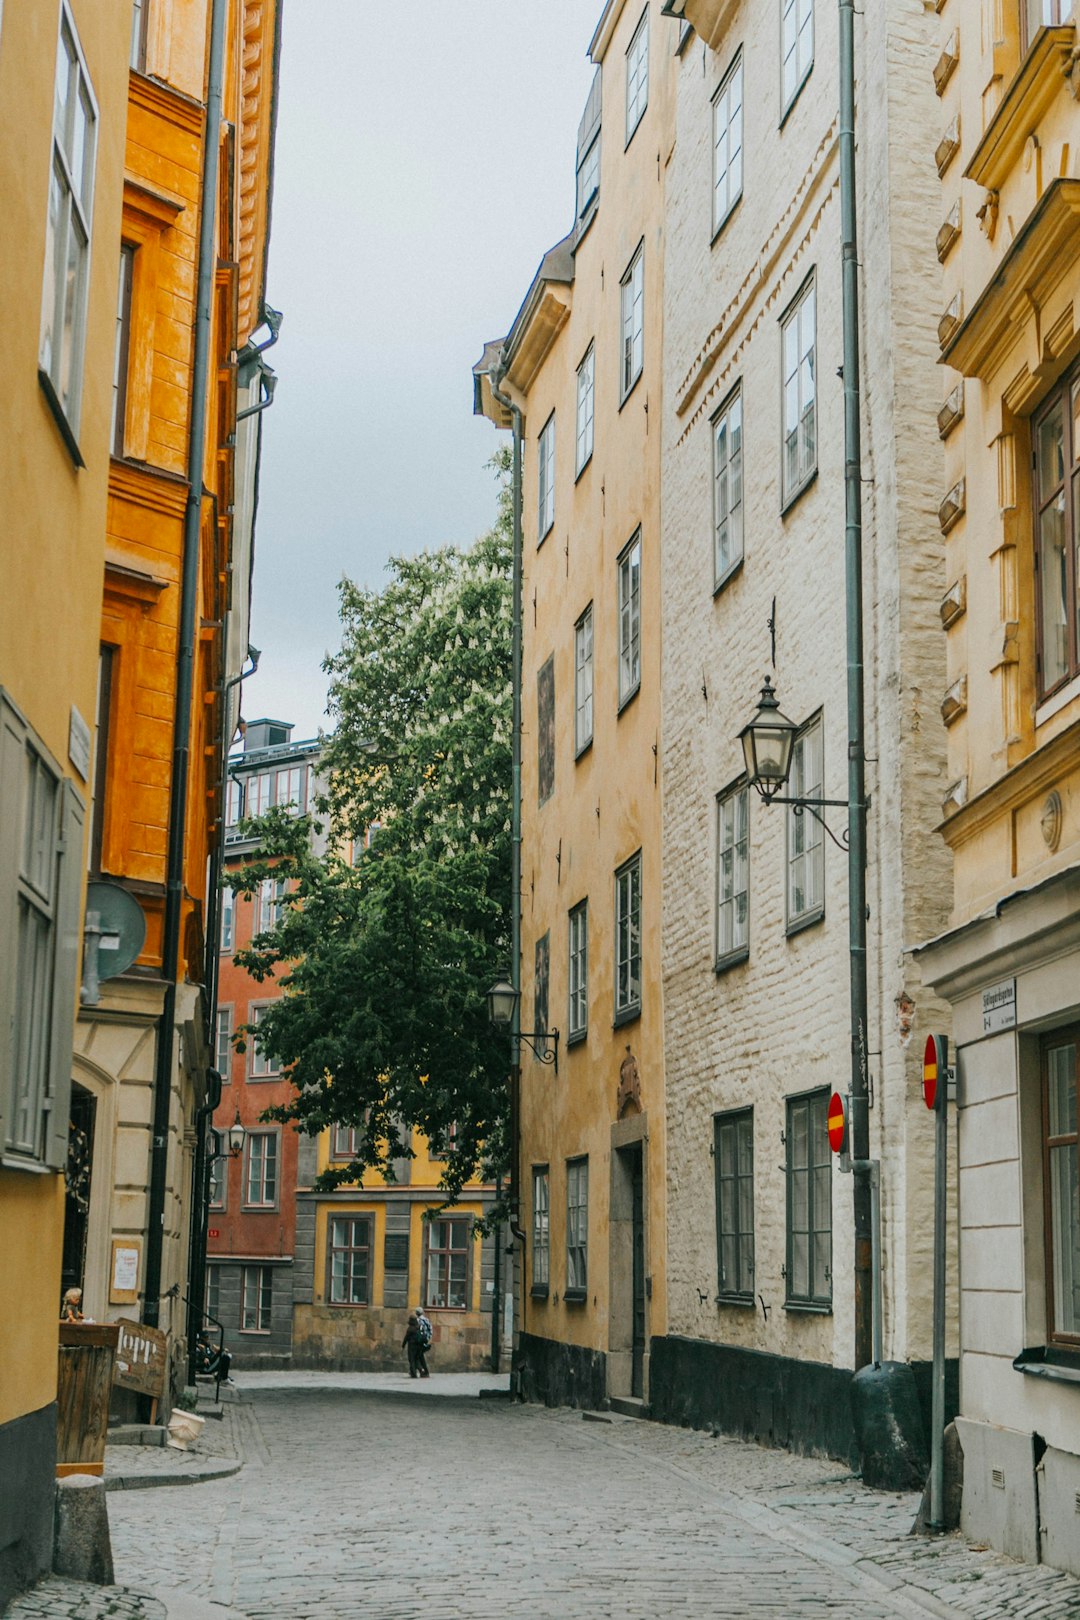 Travel Tips and Stories of Gamla stan in Sweden